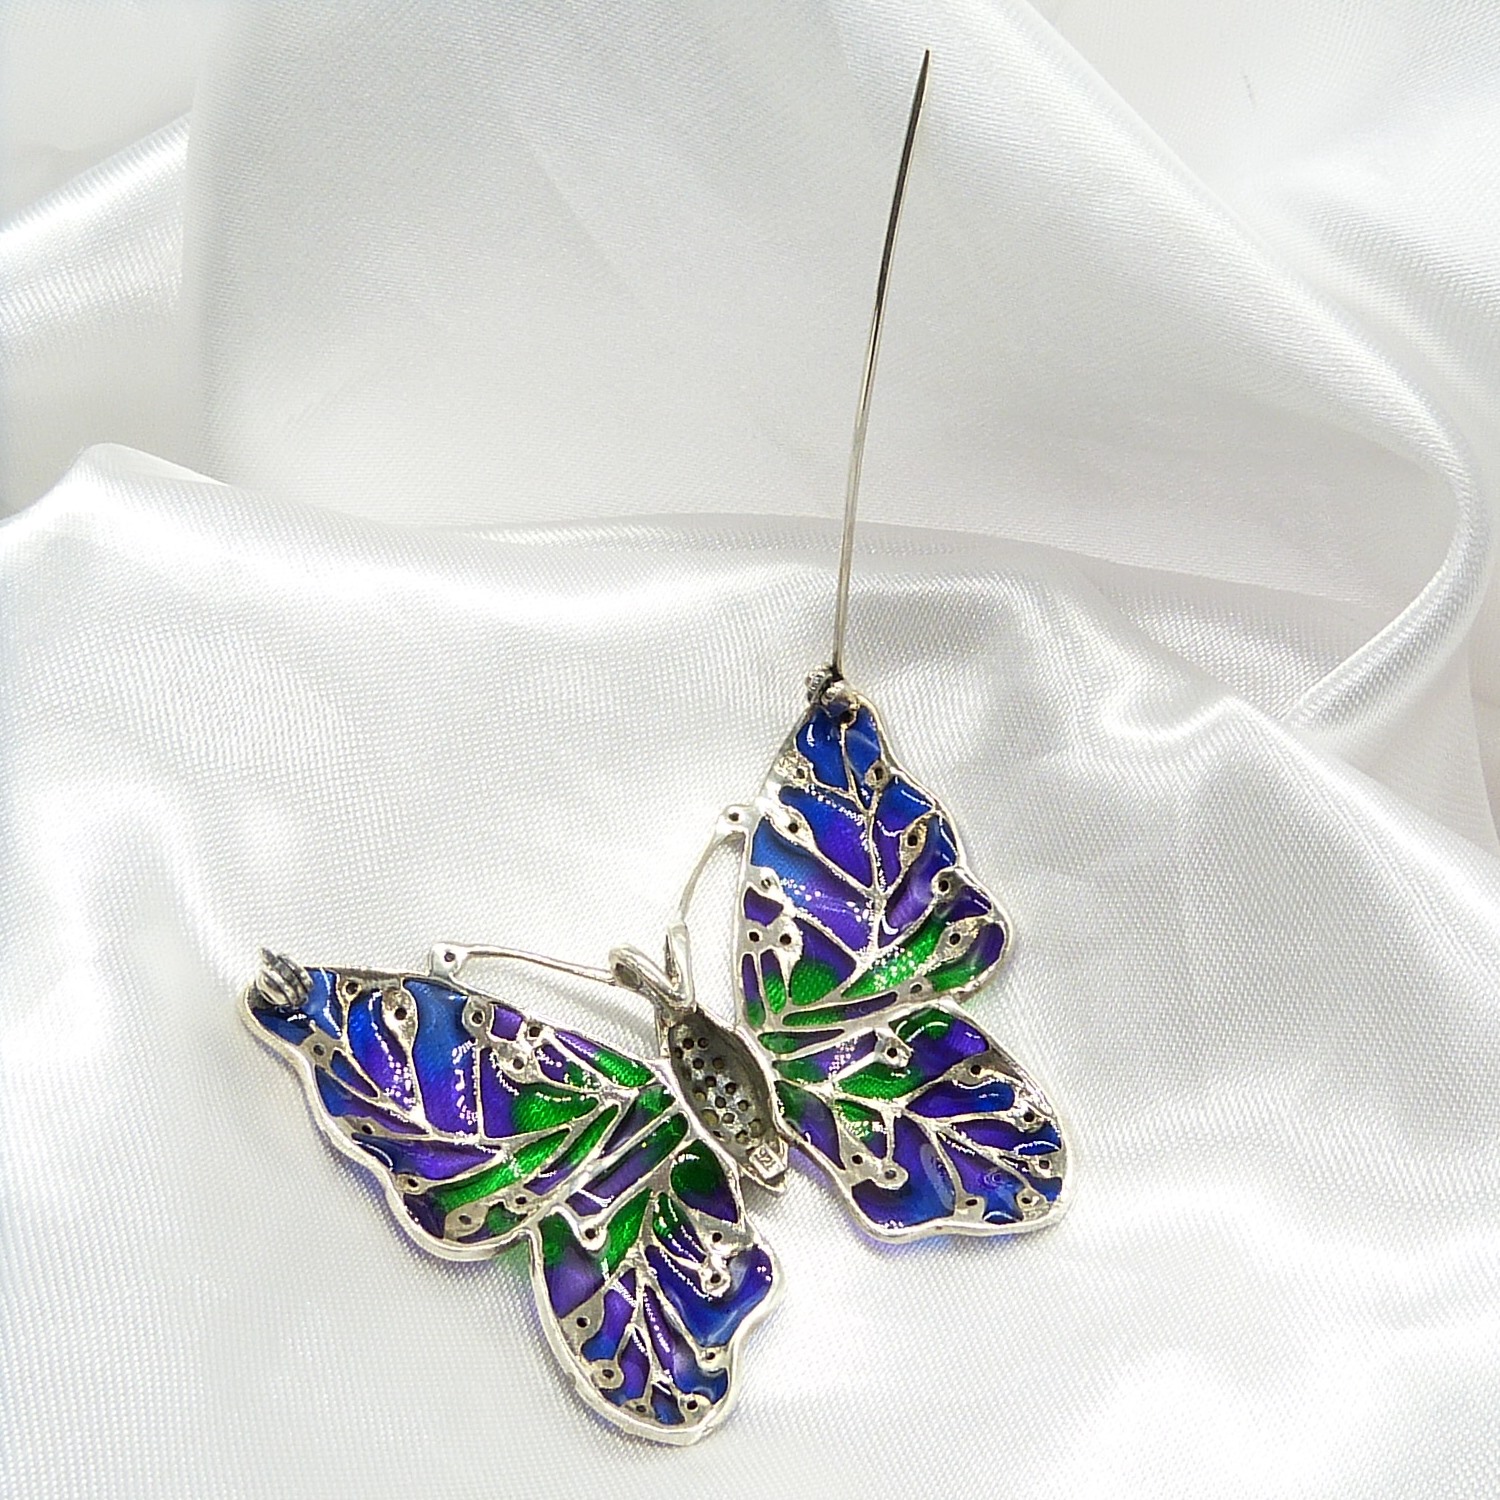 Large plique-Ã -jour butterfly brooch / pendant inlaid with coloured enamel, in silver - Image 7 of 7